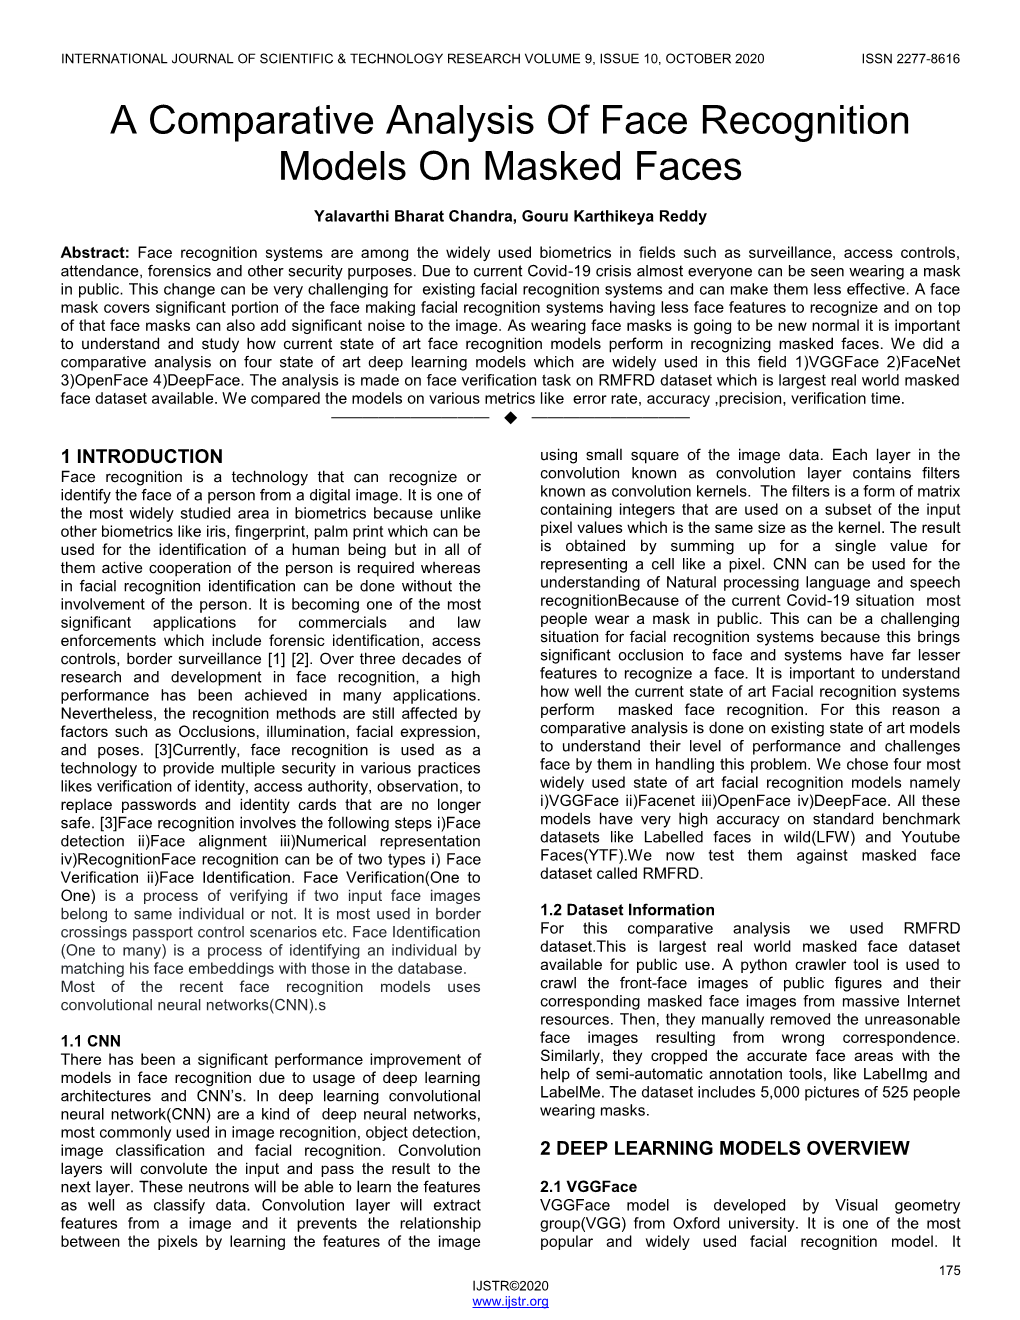 A Comparative Analysis of Face Recognition Models on Masked Faces